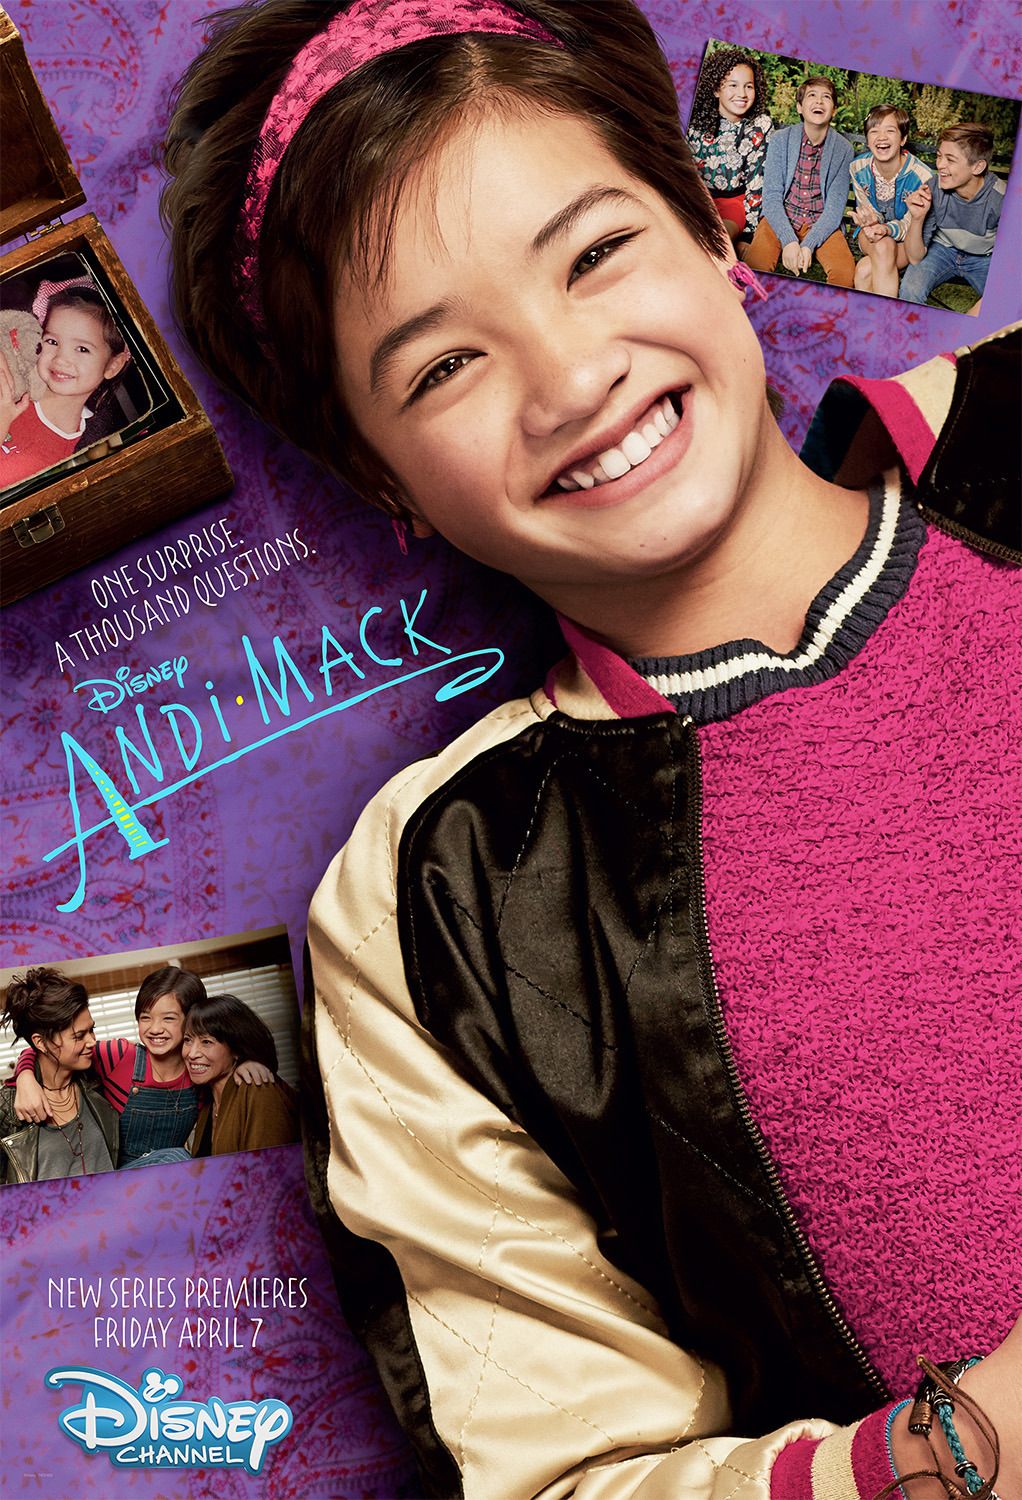 Extra Large TV Poster Image for Andi Mack 